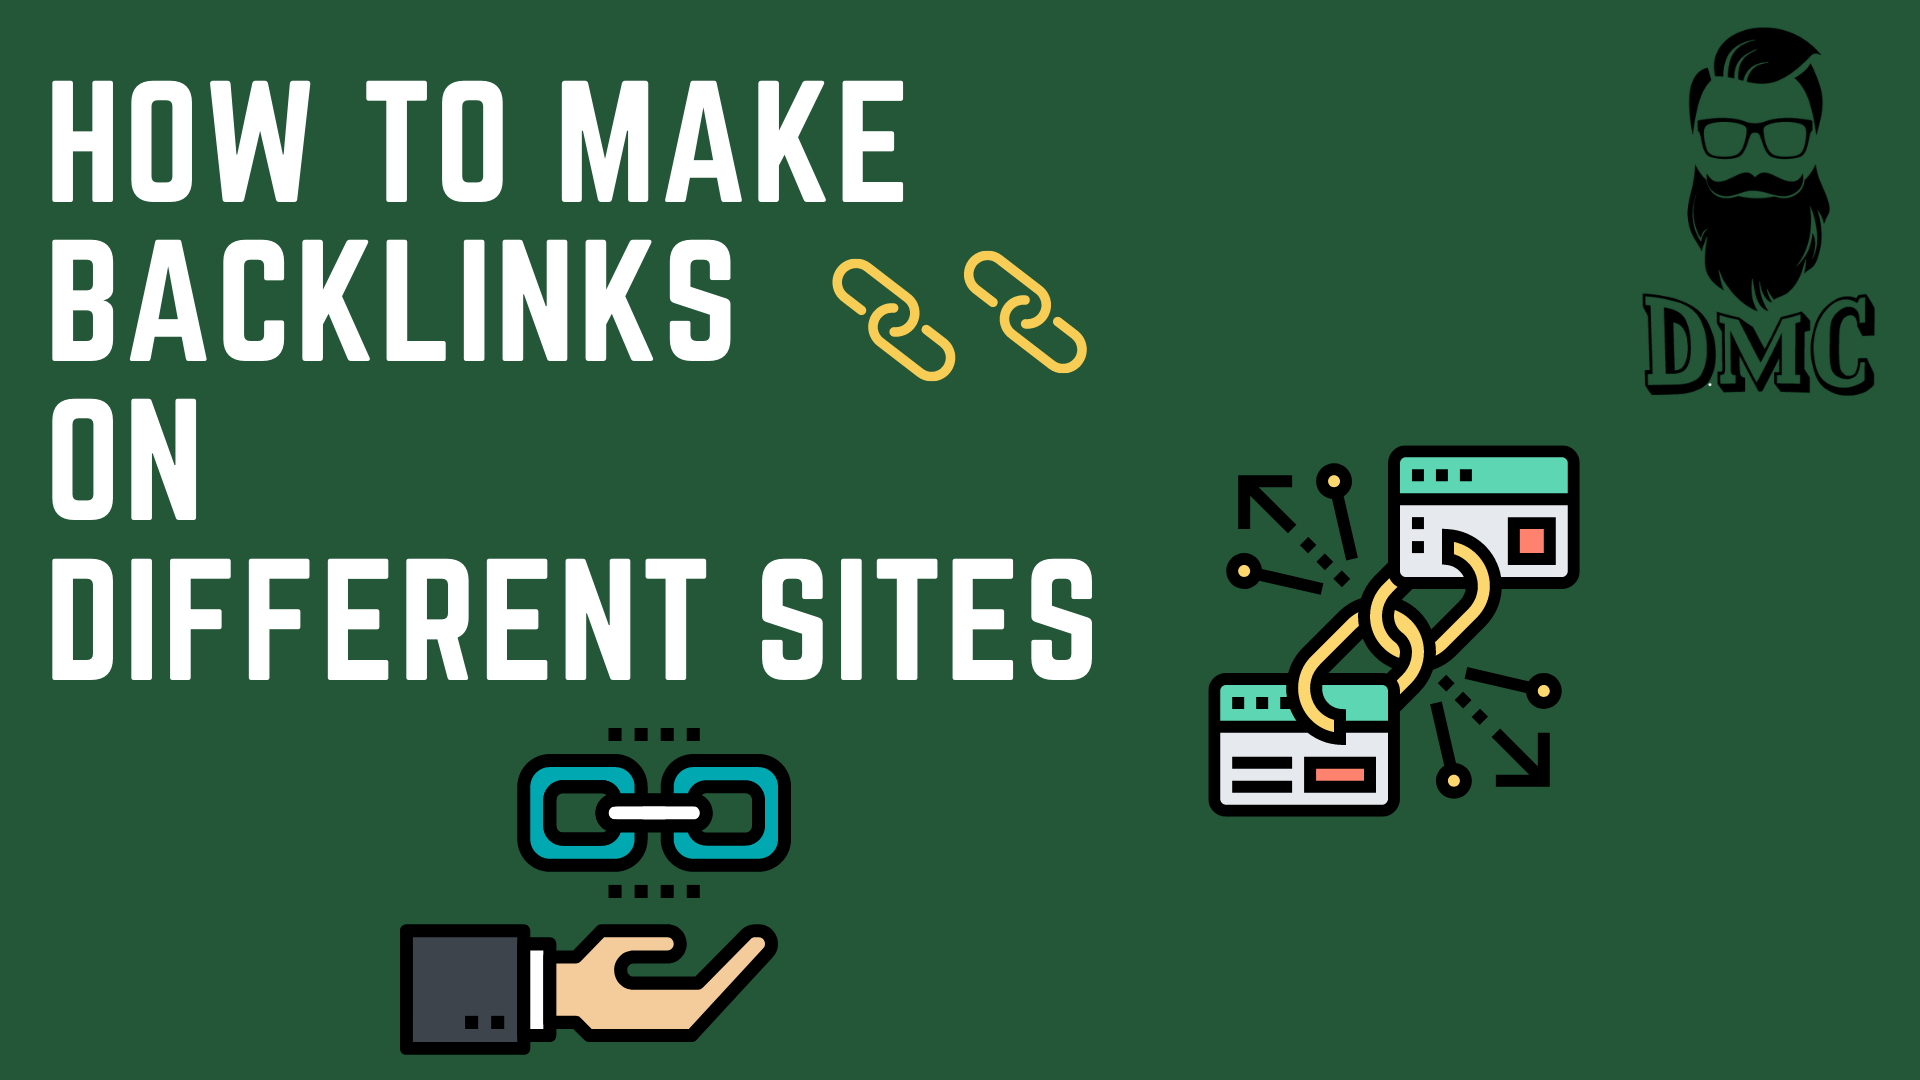 HOW TO CREATE BACKLINKS ON DIFFERENT SITES